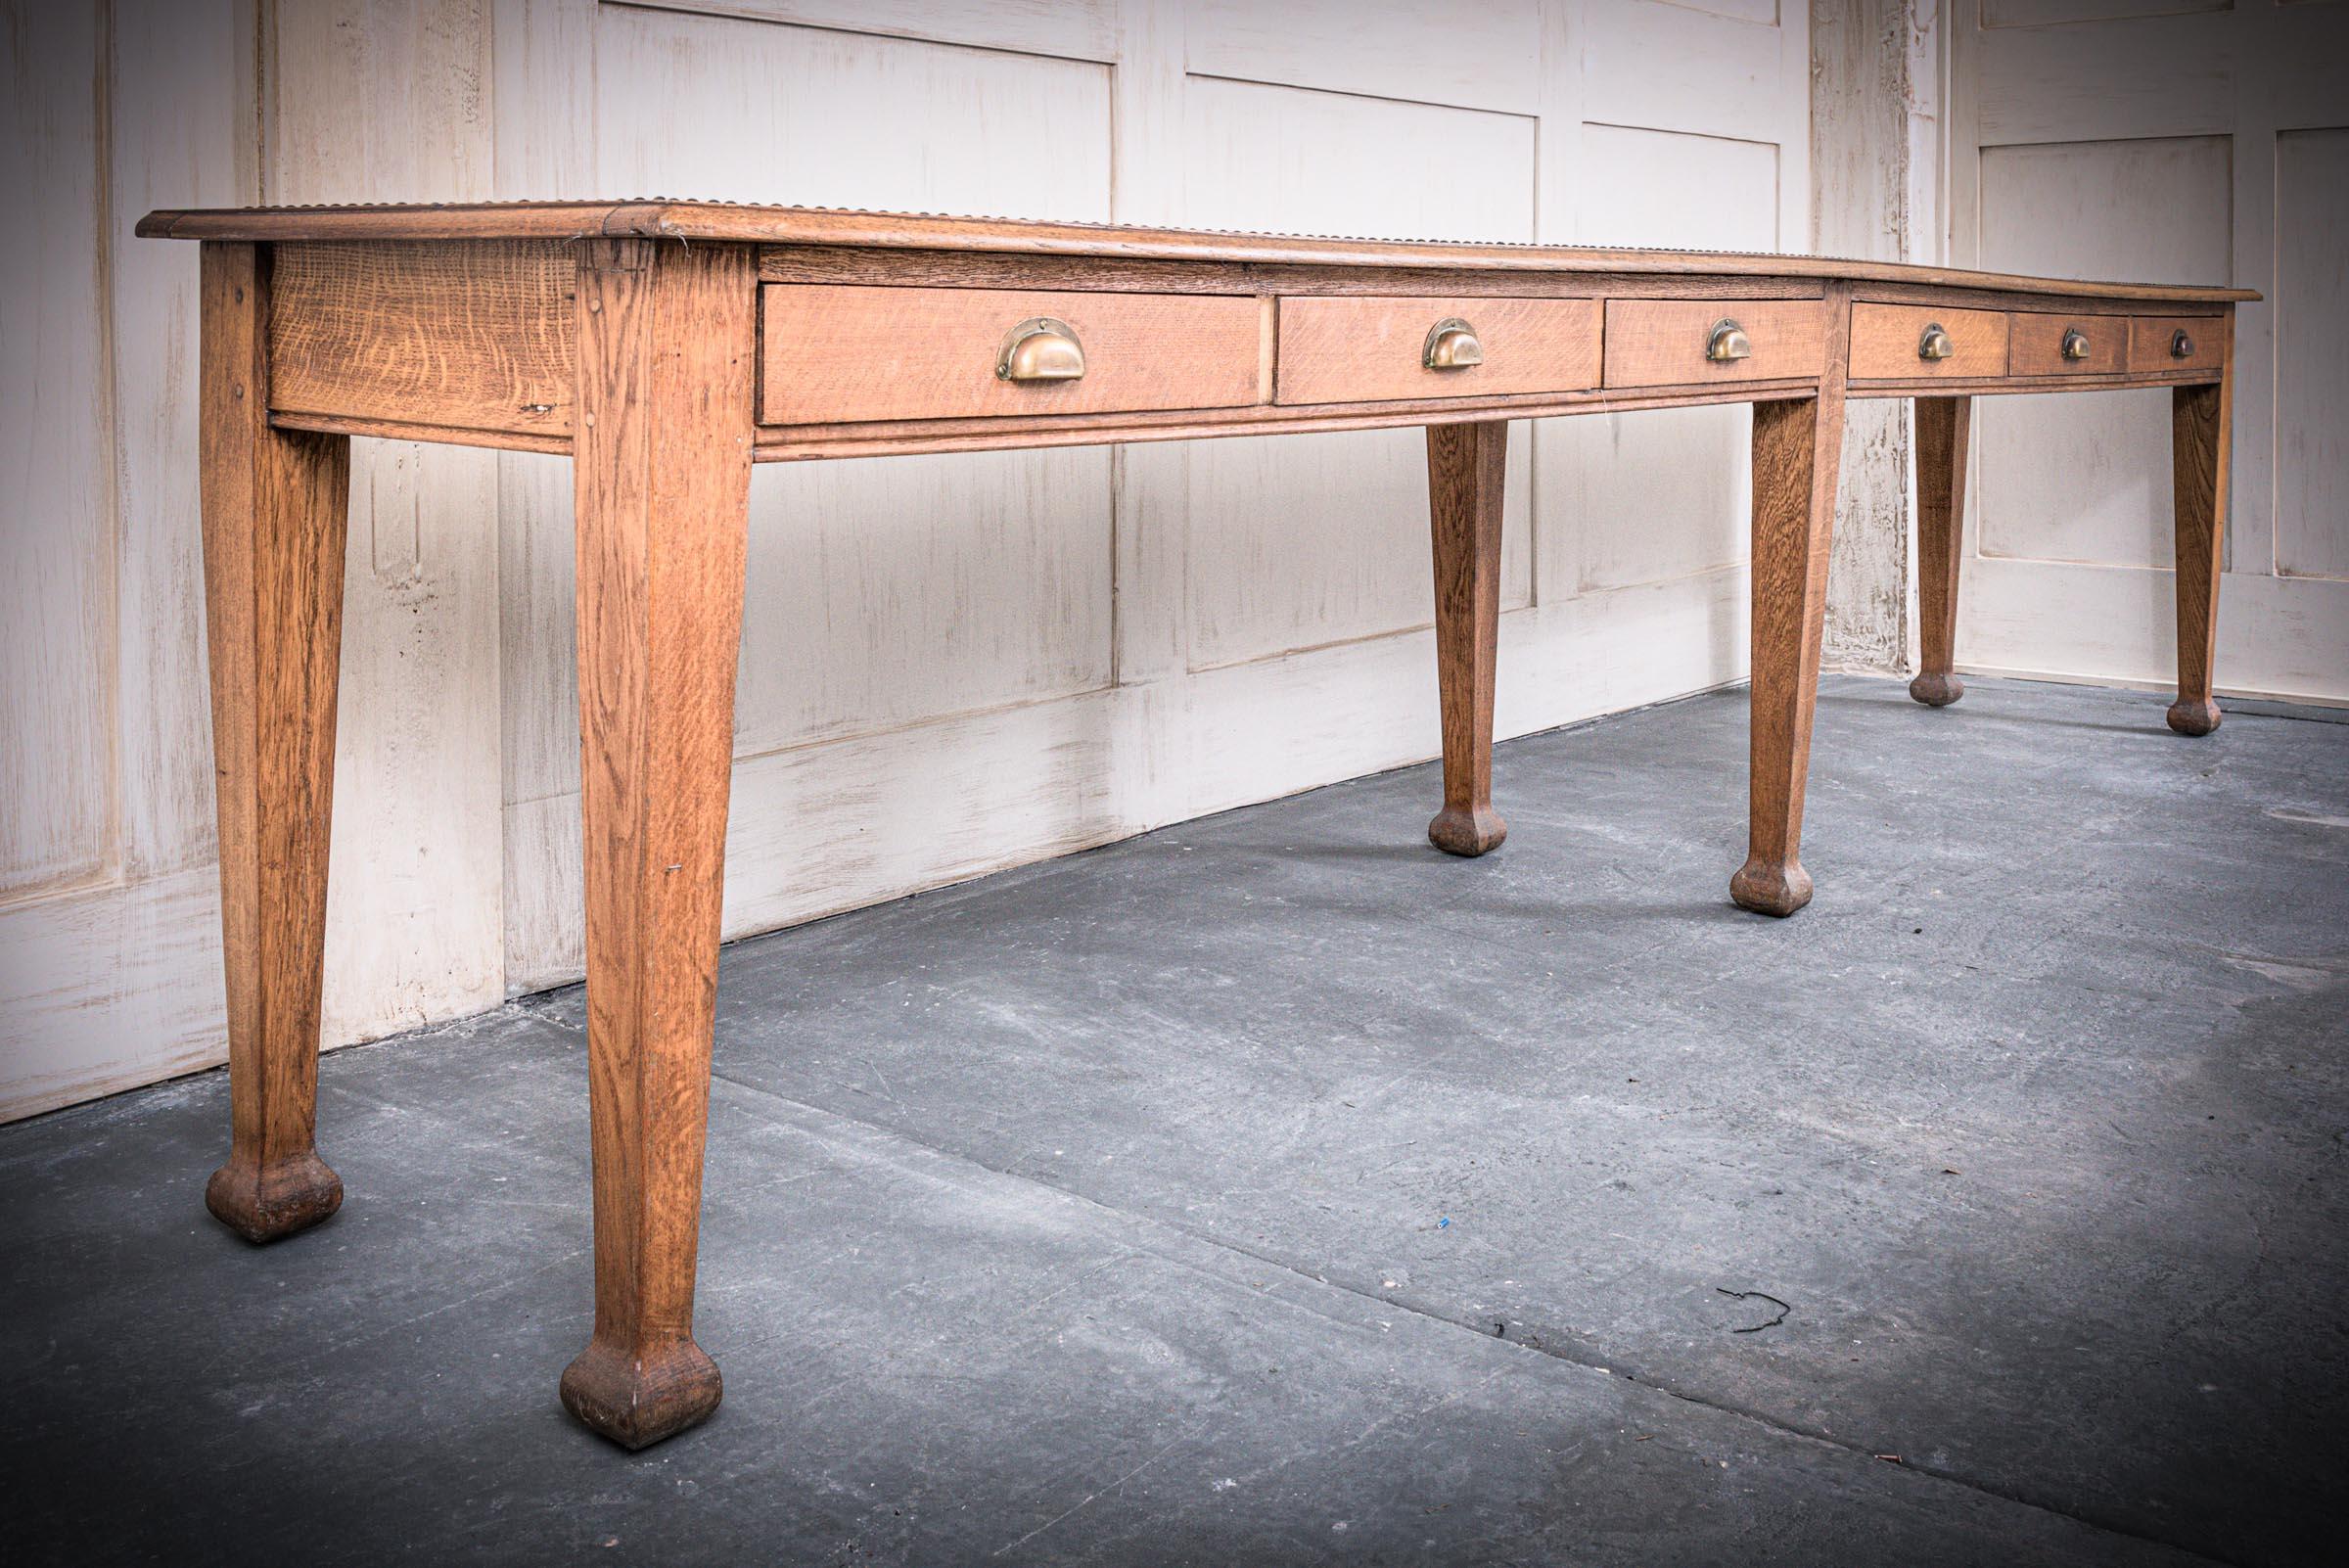 A seriously commanding piece of furniture, dictating its own presence, possibly doubling up as an over-extended long console table. Circa 1880, this quality Victorian medullary rayed quarter cut oak British library table requires some space but will